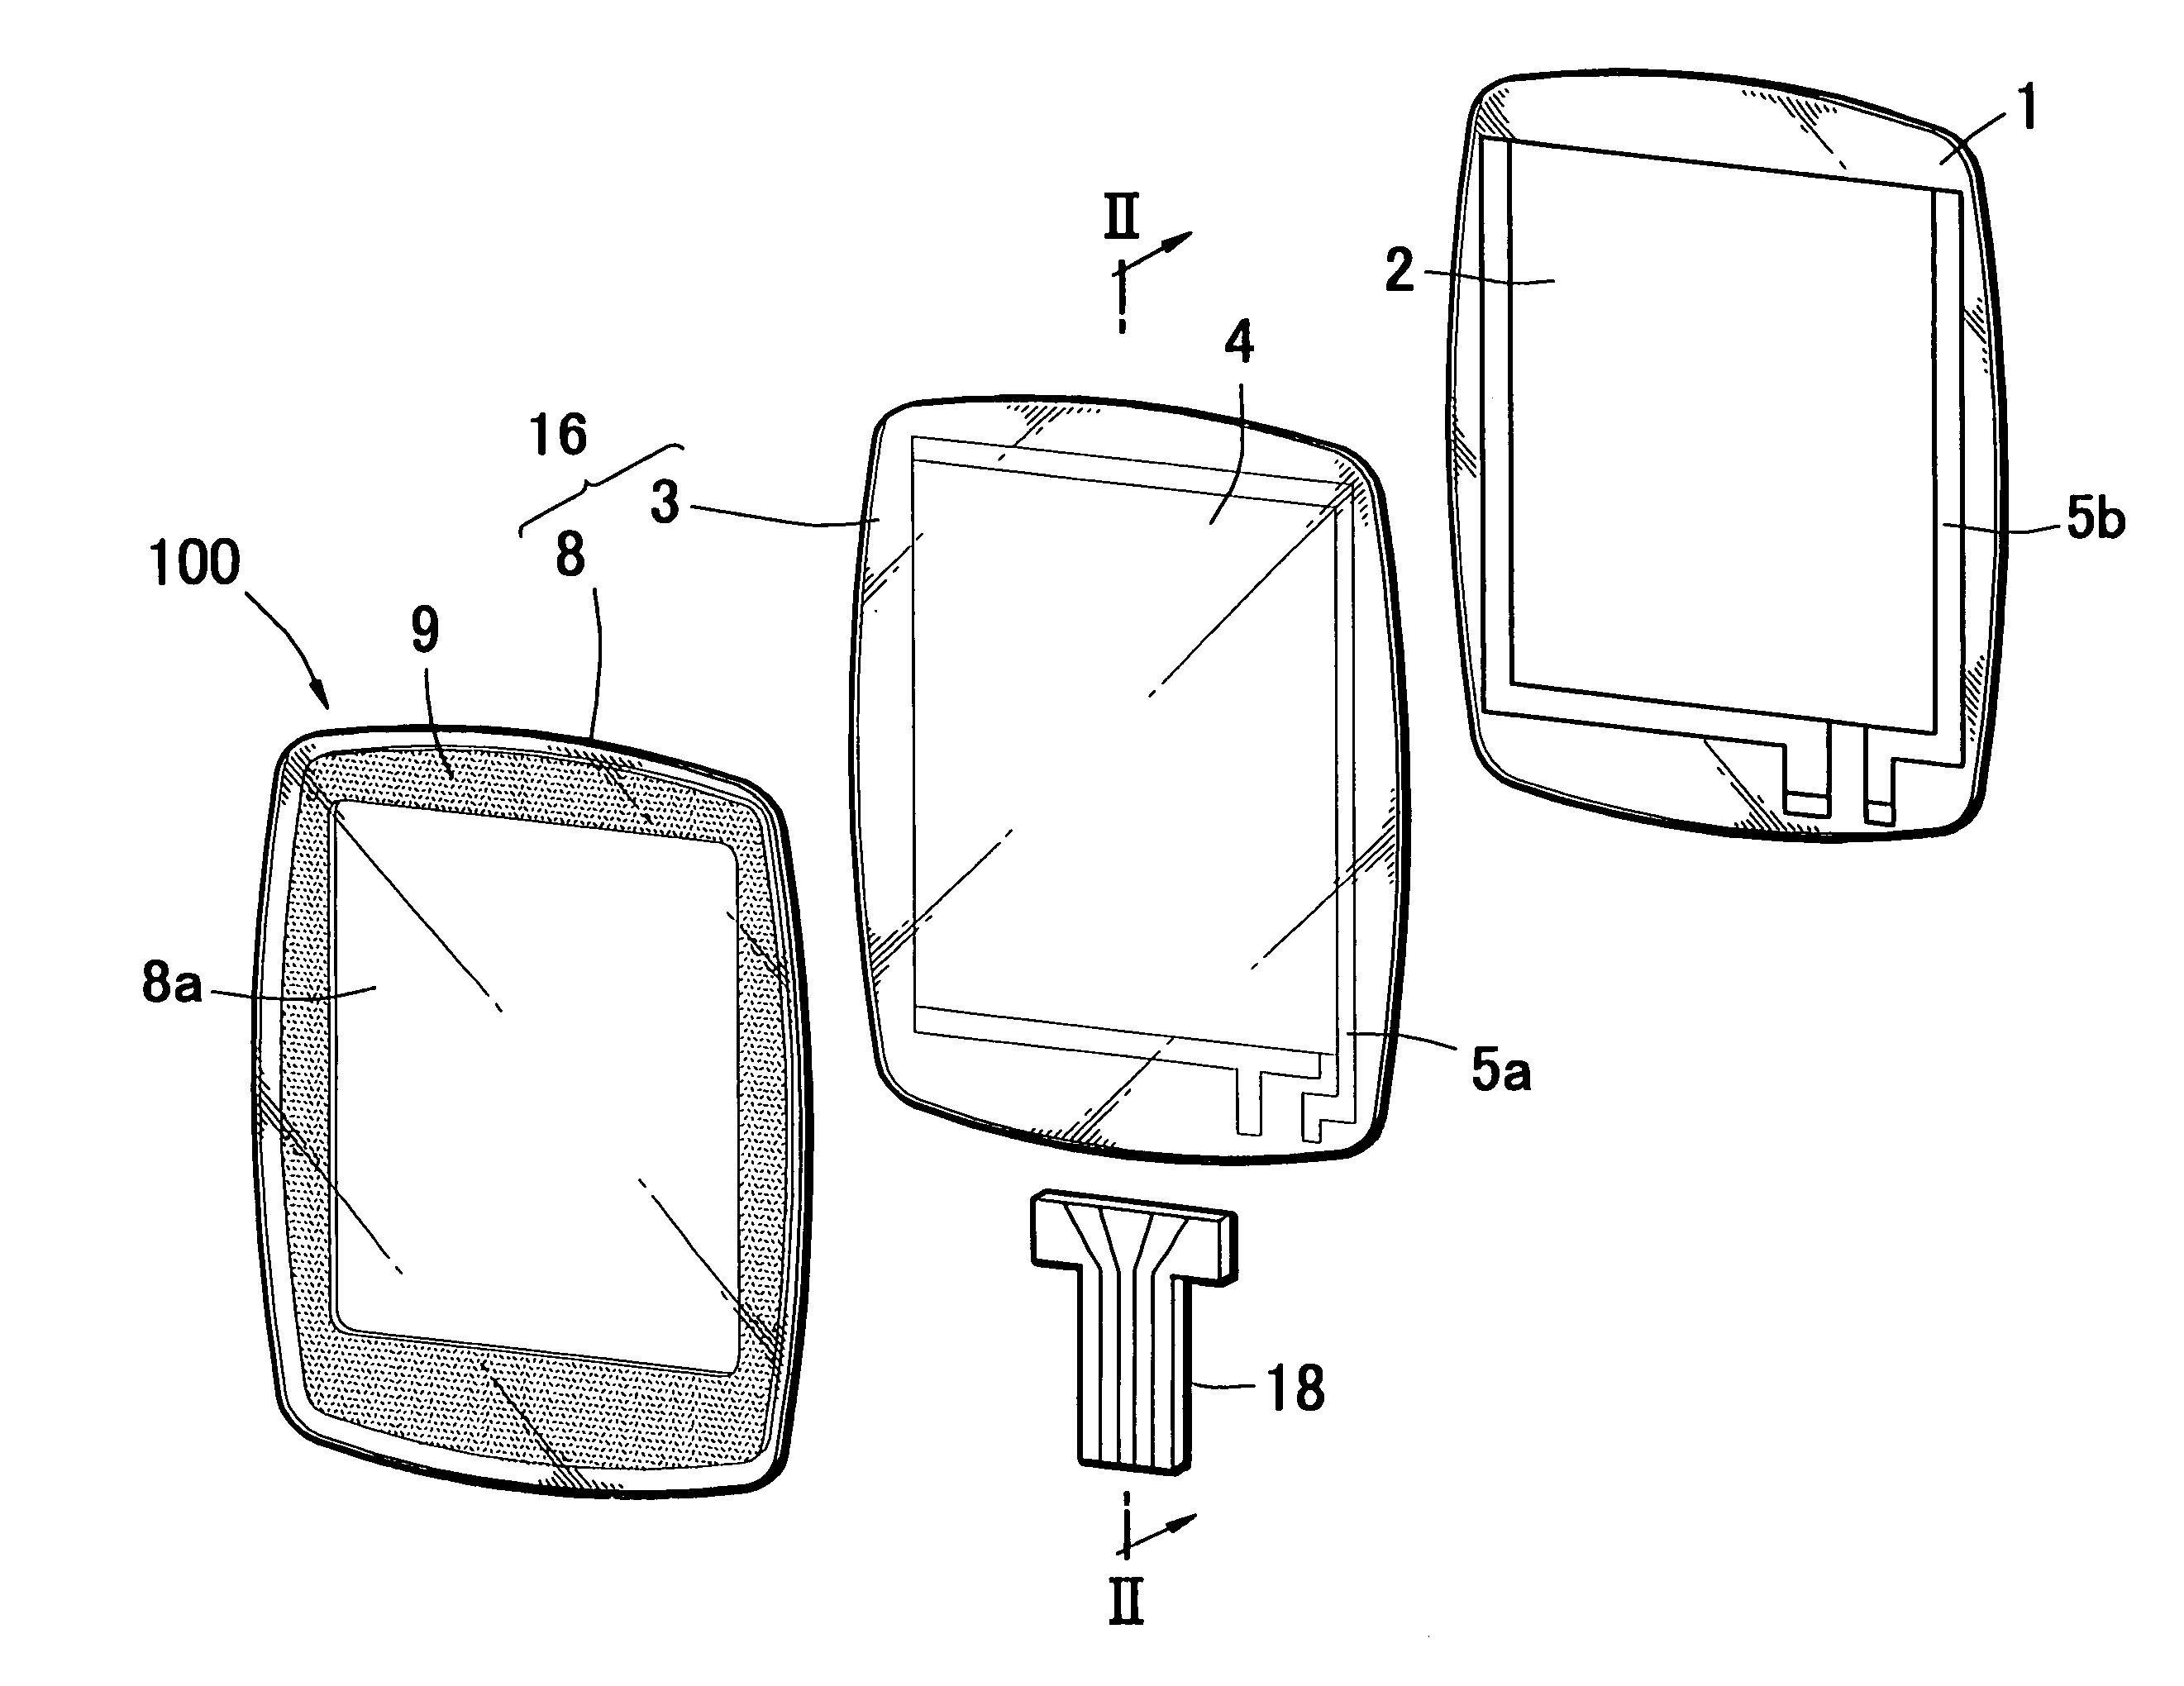 Electronic device with protection panel, protection panel, and method of fabricating protection panels